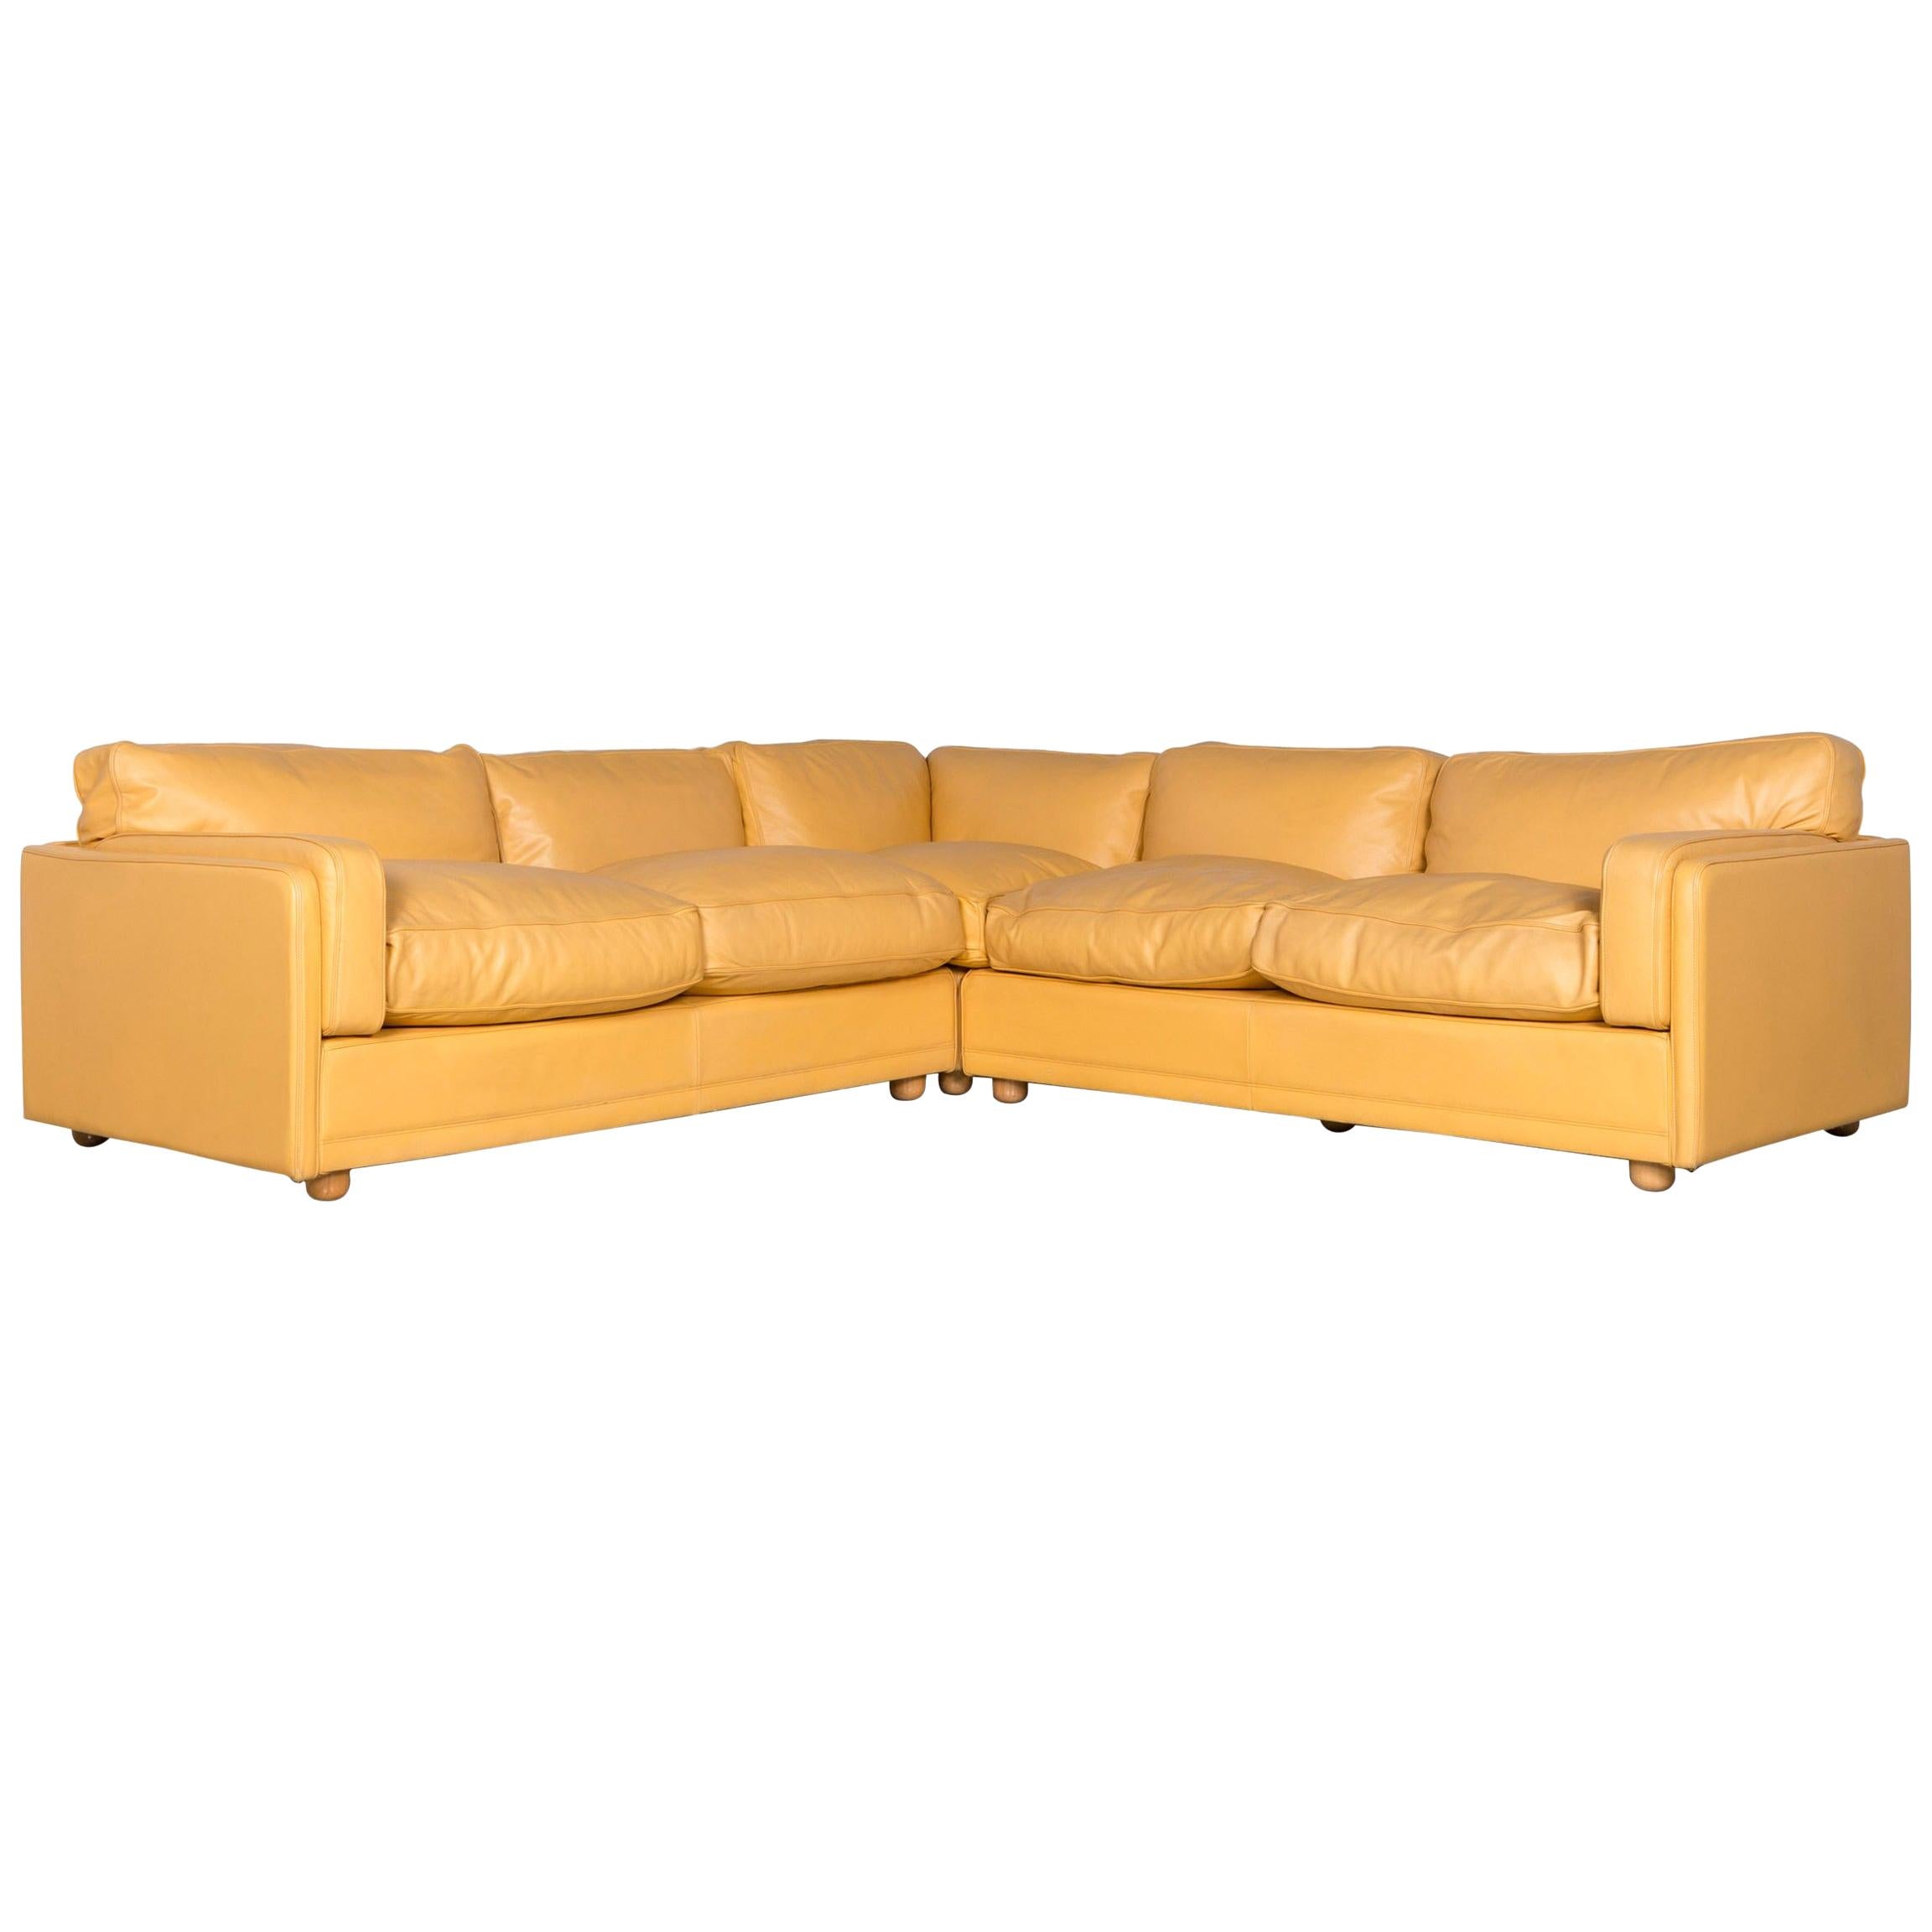 Poltrona Frau Designer Leather Corner Couch Sofa Yellow For Sale